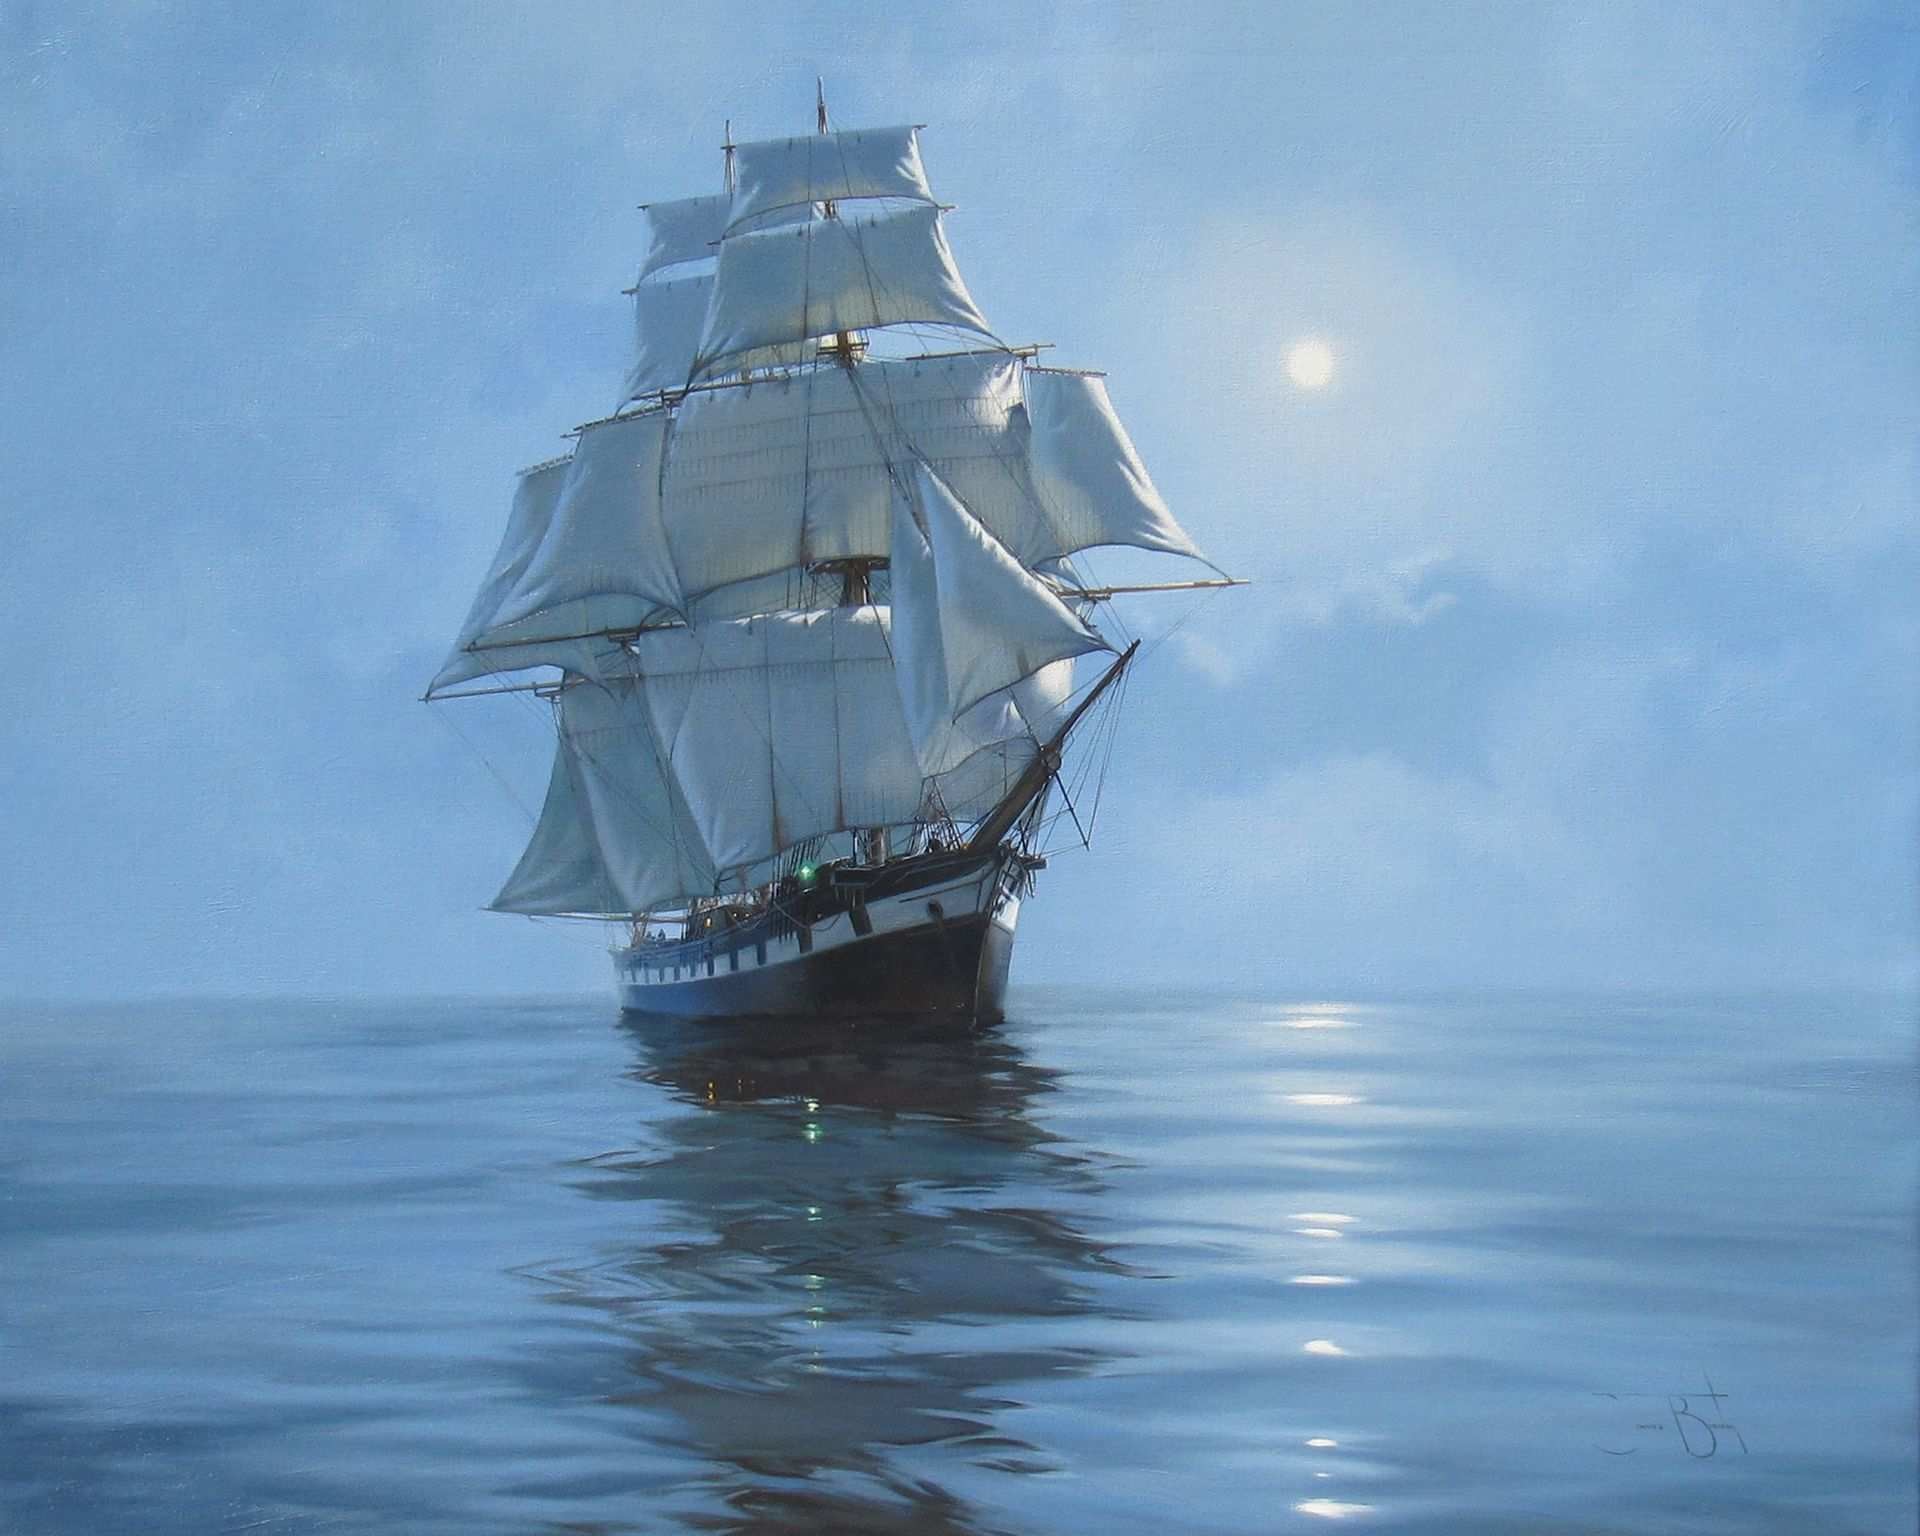 1920x1536 Sailing Ship Painting Luxury Ship Wallpaper In Hd Available Here for Free  Download